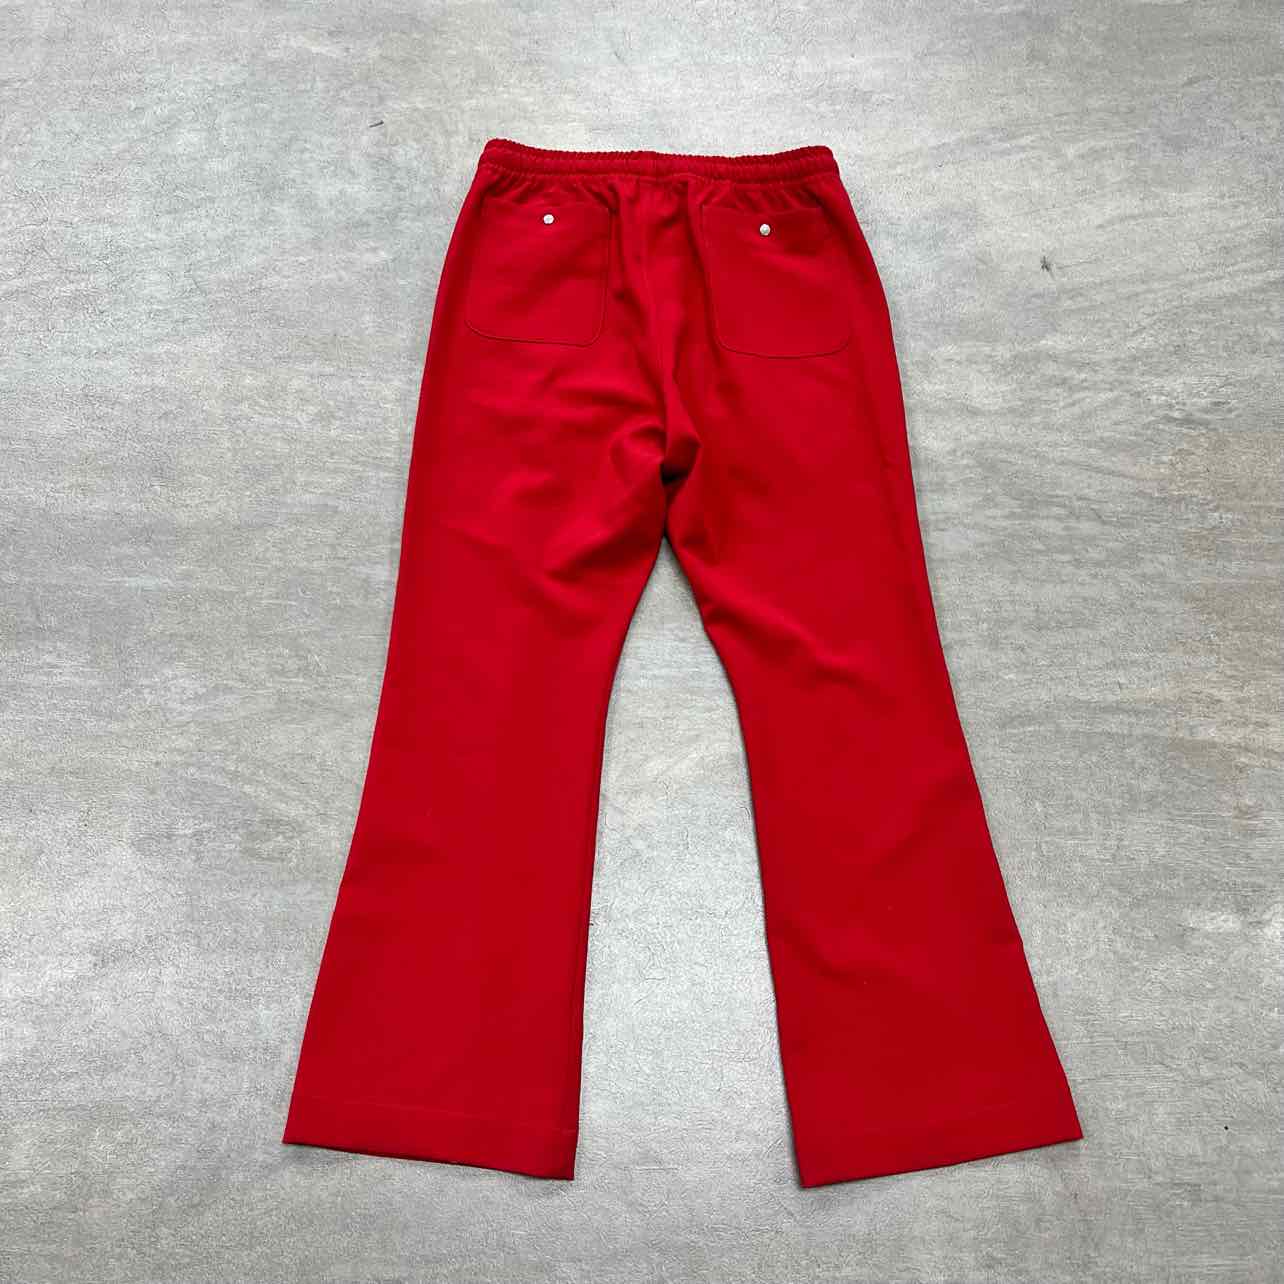 Needles Pant &quot;COWBOY&quot; Red Used Size M